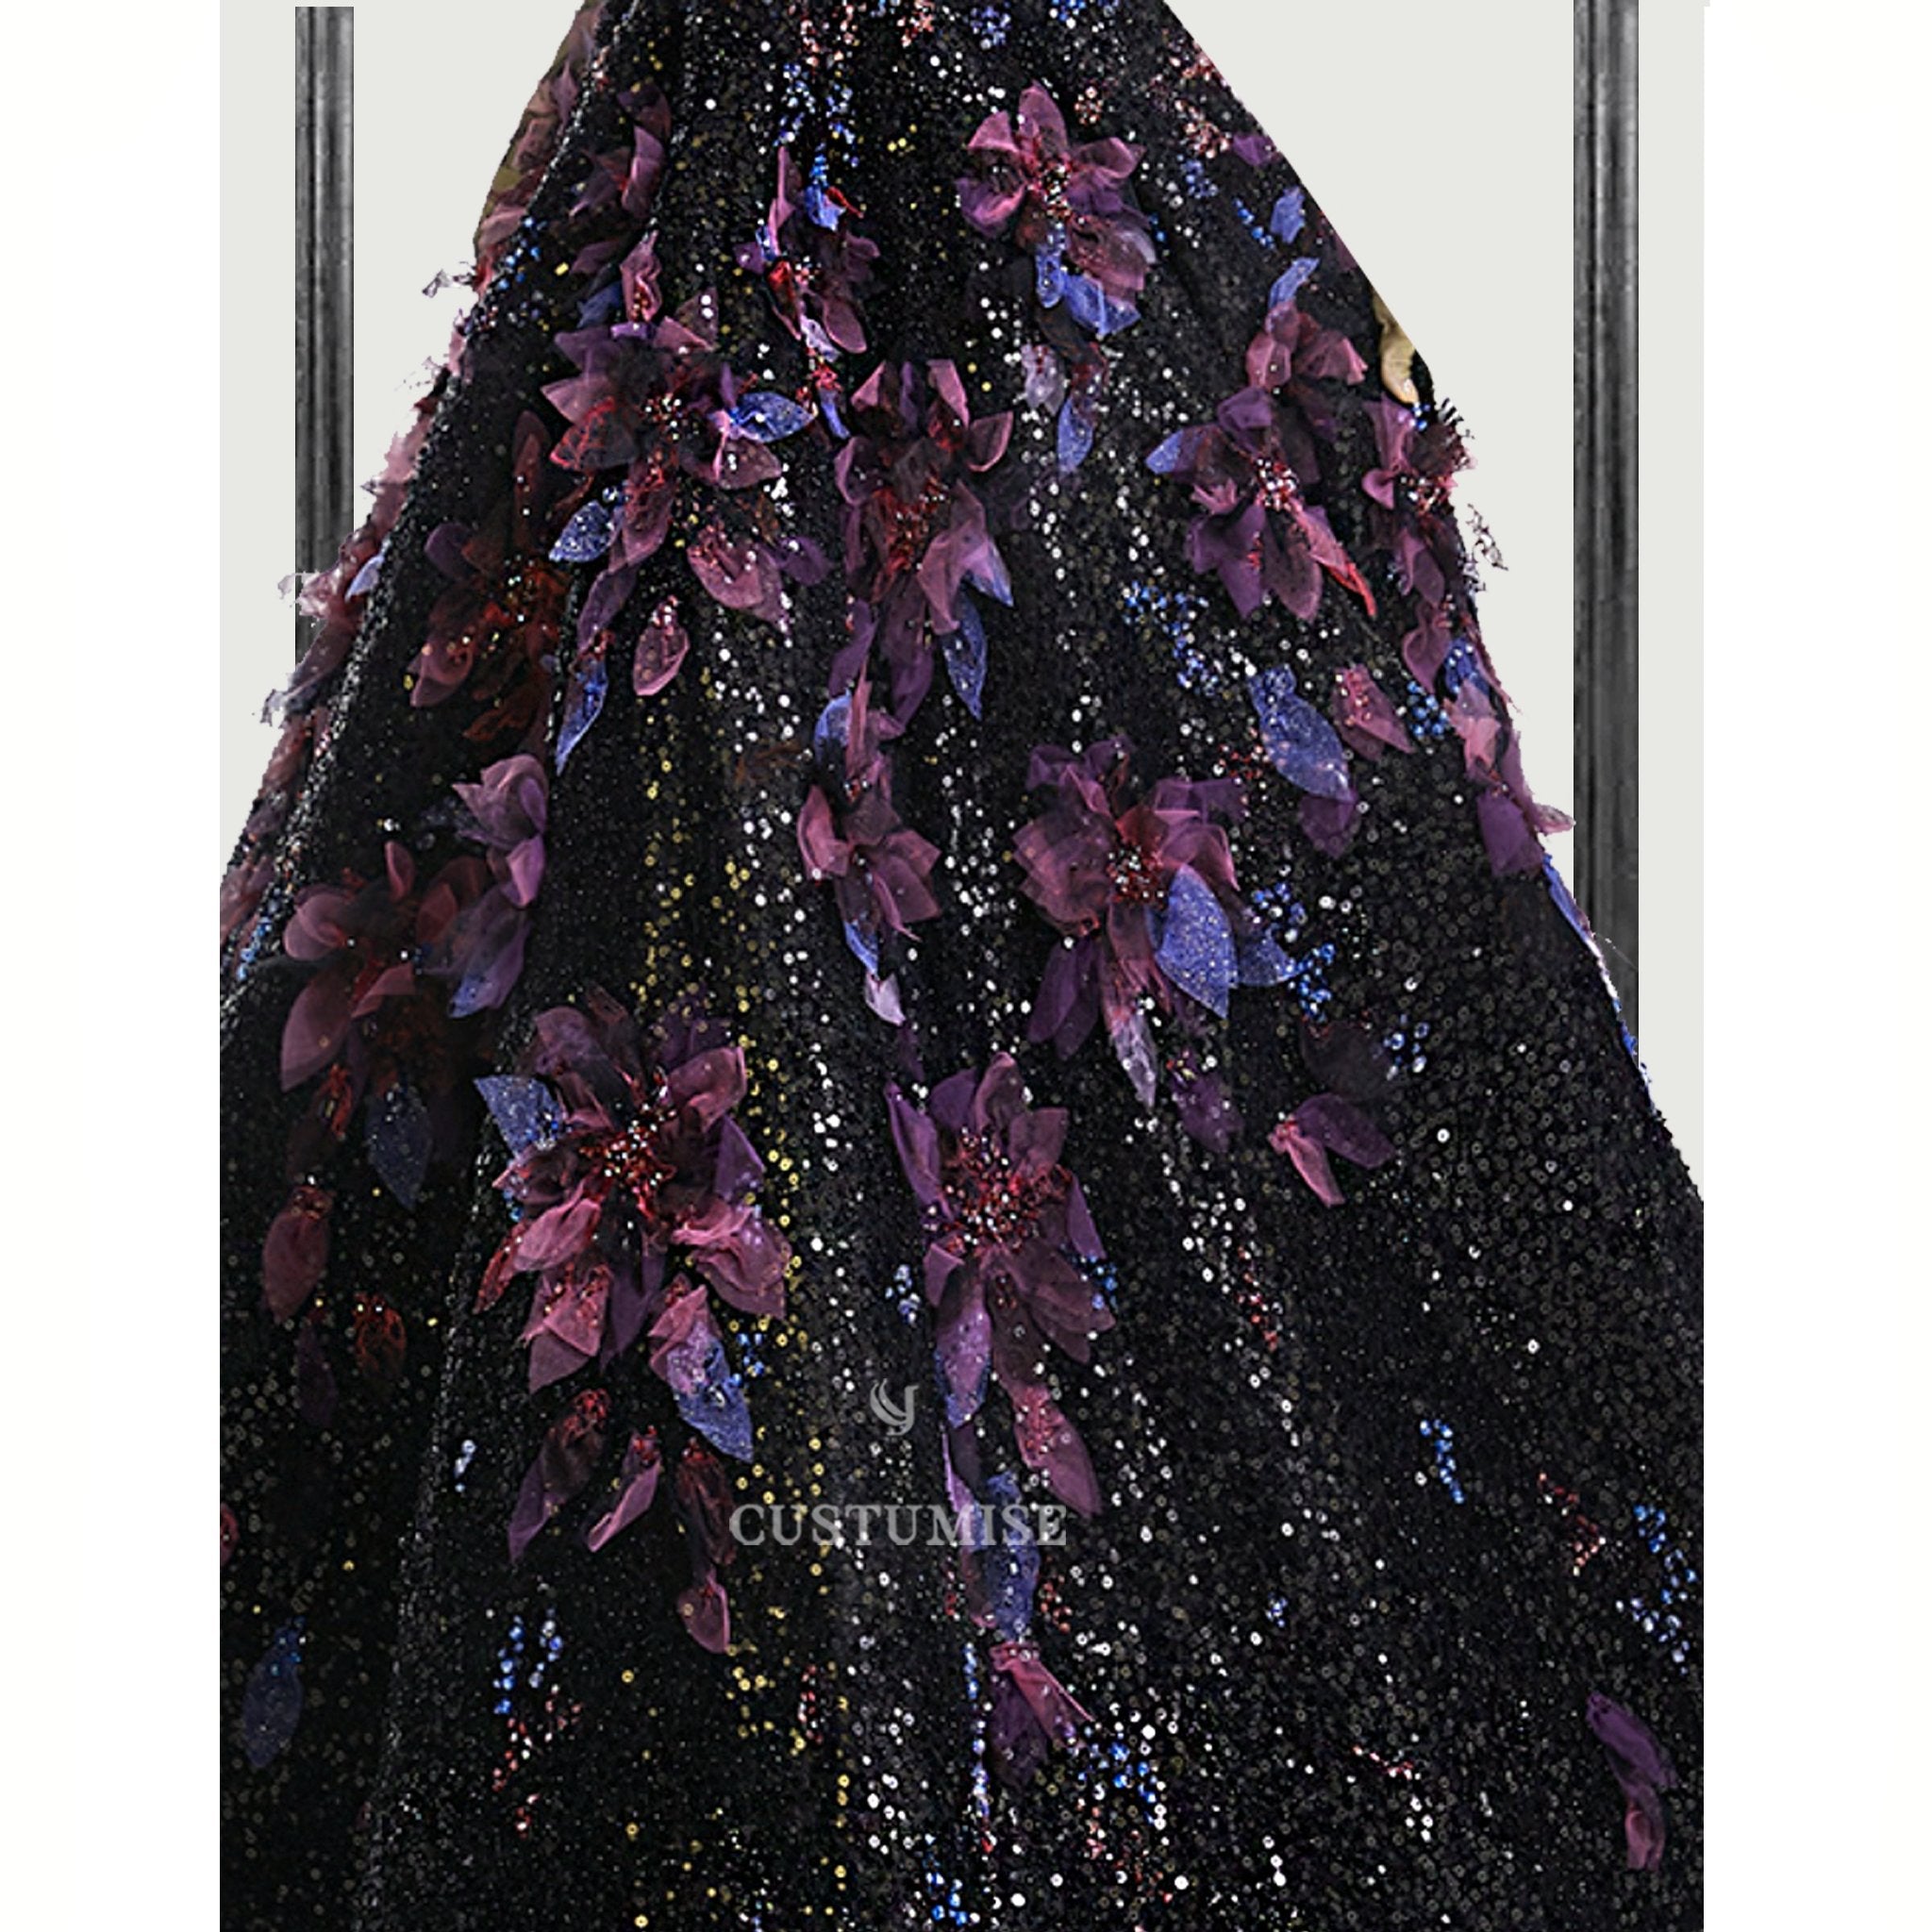 Black Sequenced 3Dfloral gown. - Indian Designer Bridal Wedding Outfit